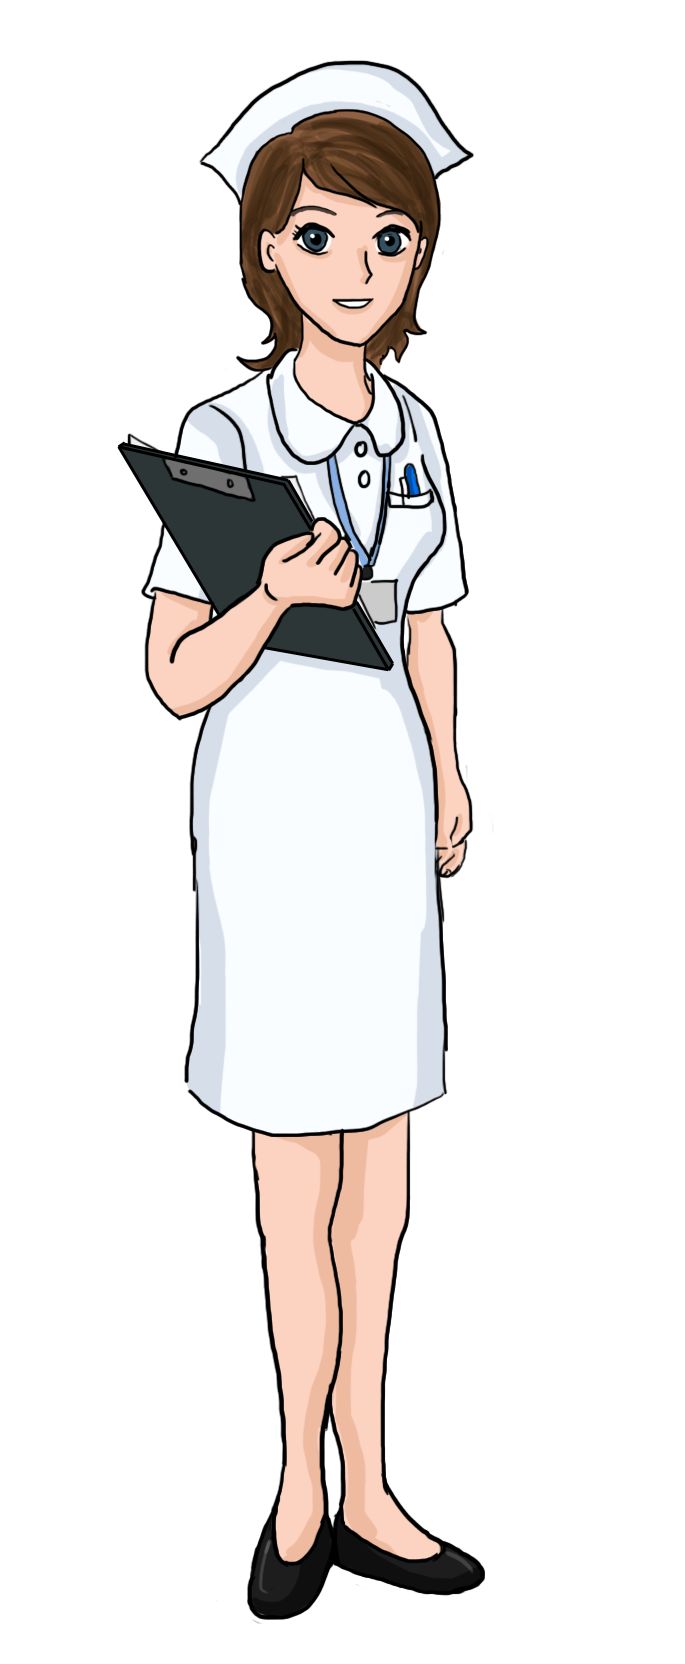 Clip Arts Related To : nurse clipart png. 